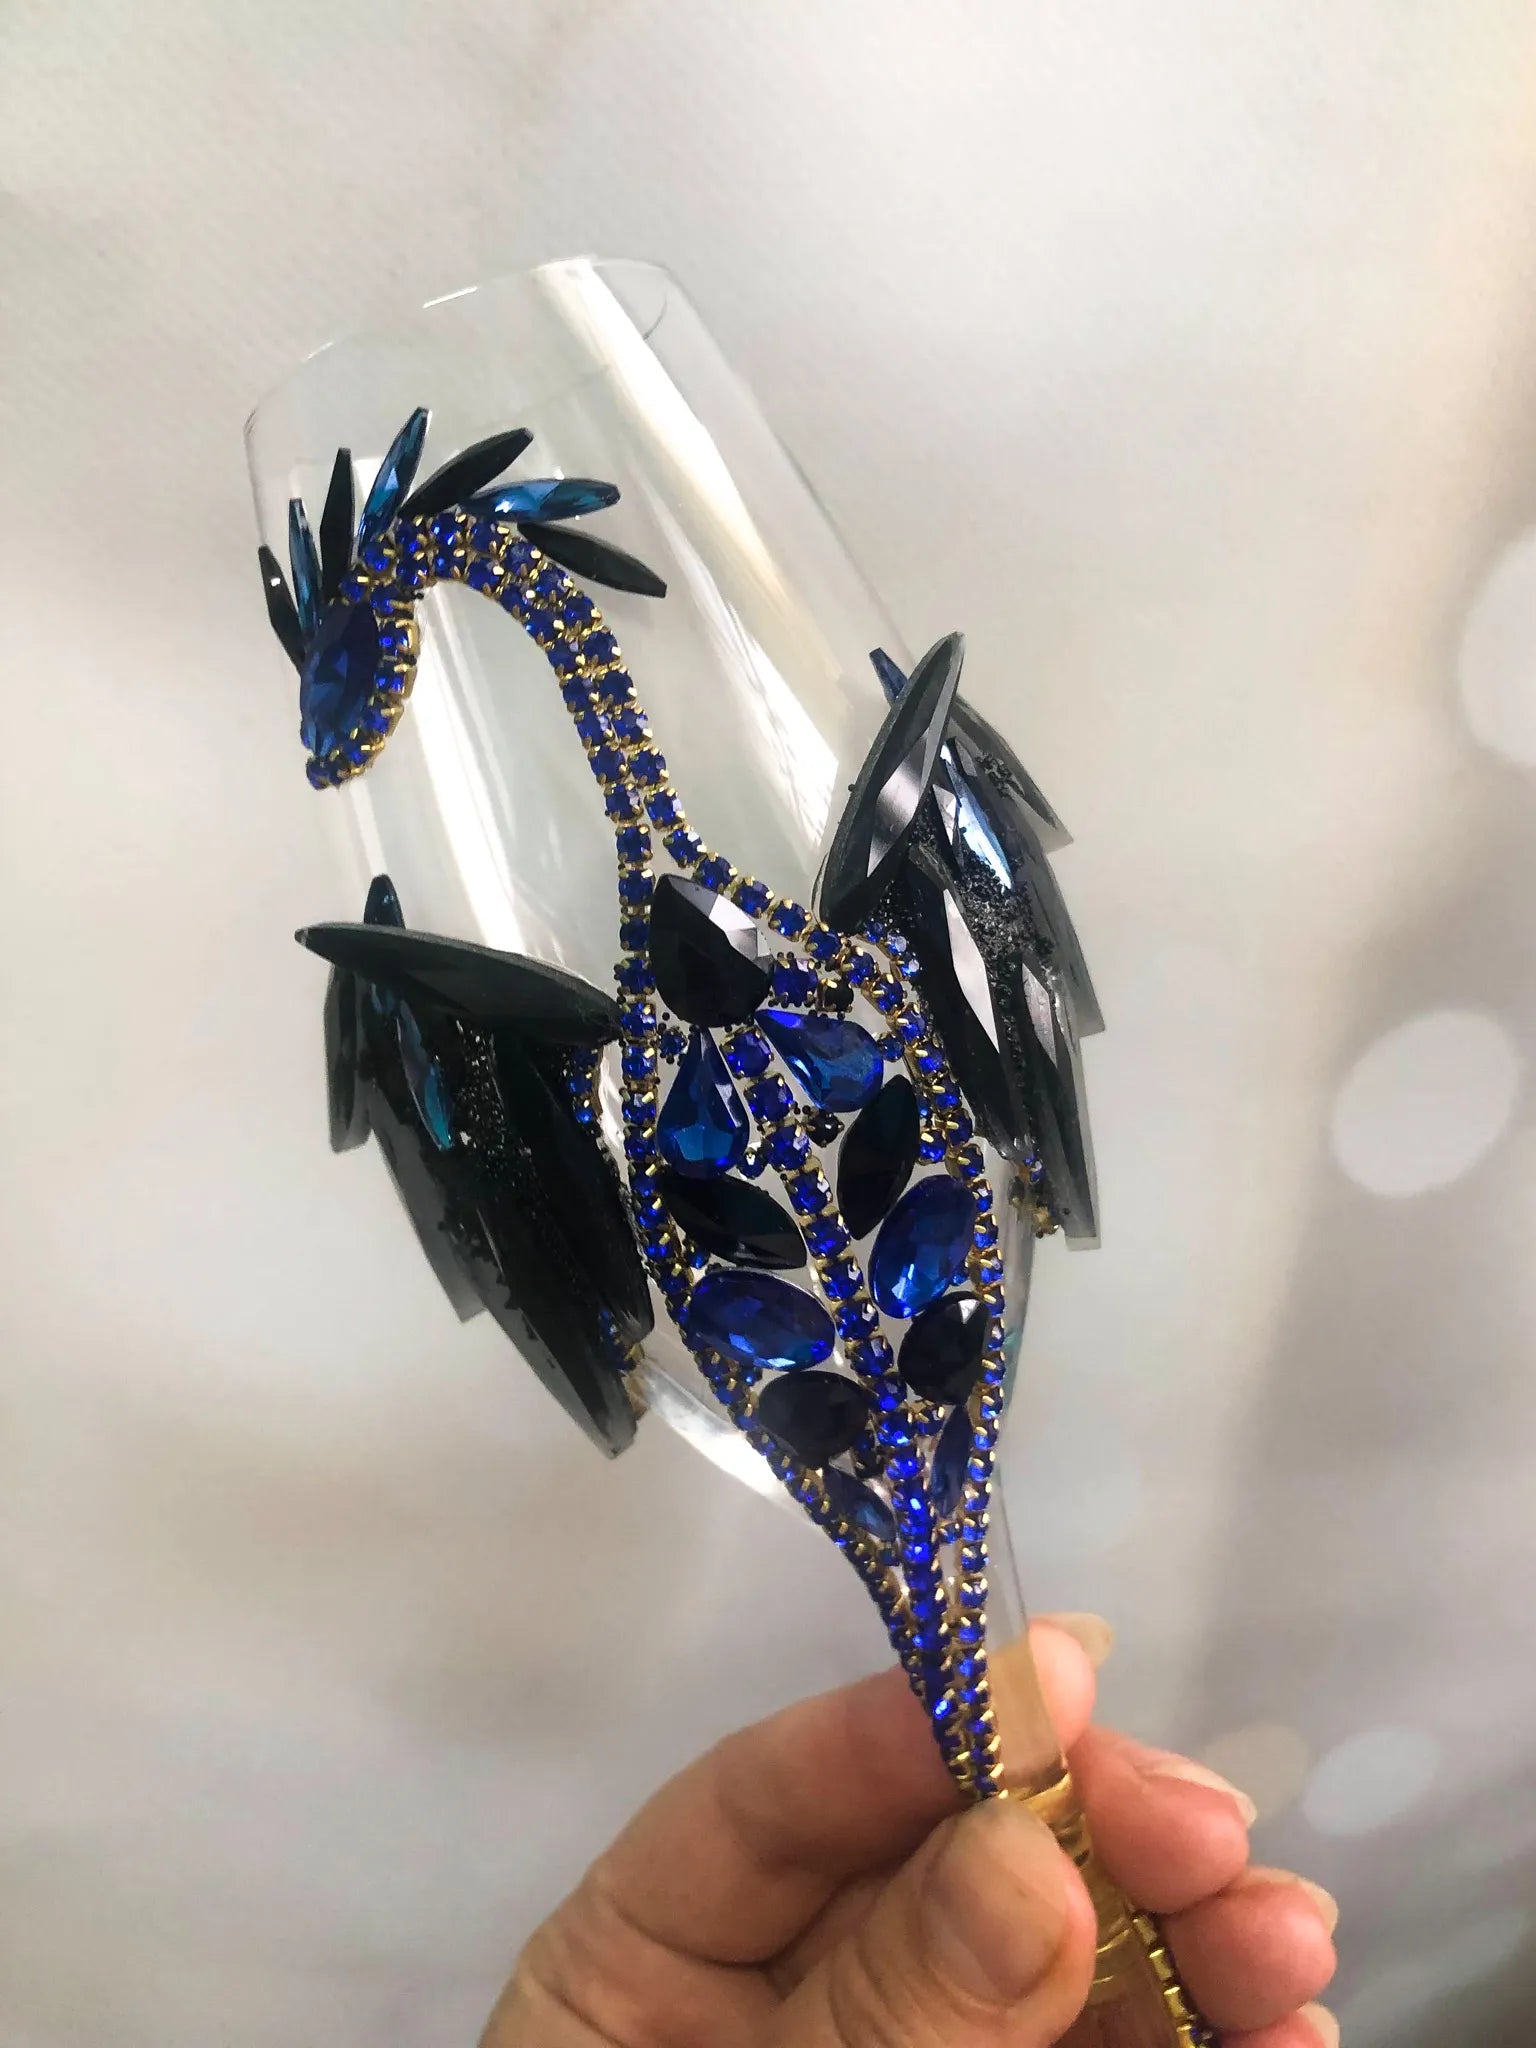 Rhinestone dragon flute with personalized touch